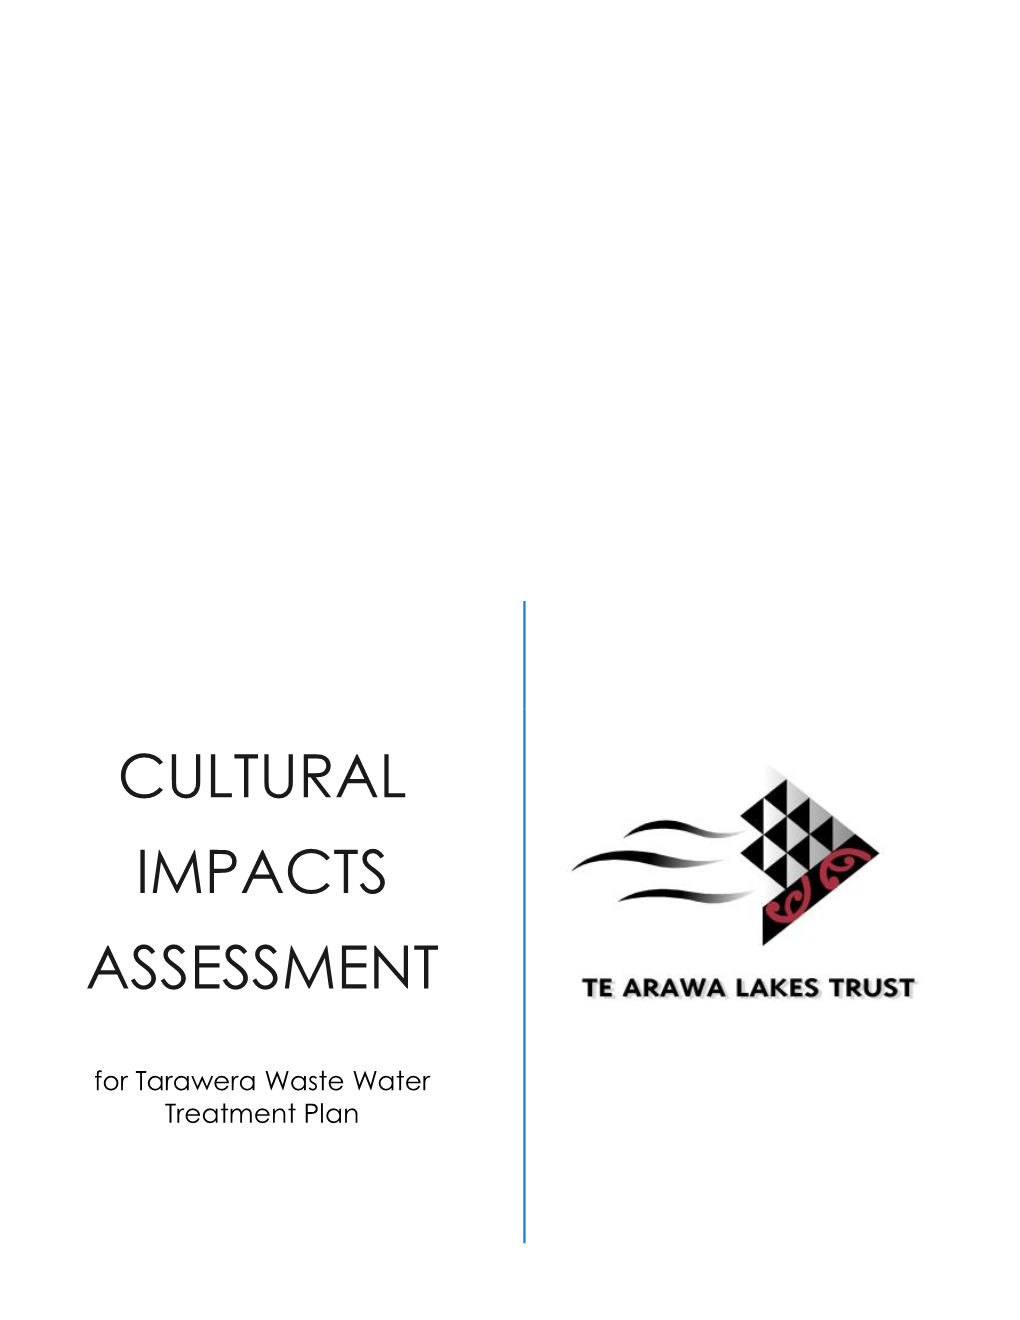 Cultural Impacts Assessment Has Been Carried out by the Te Arawa Lakes Trust